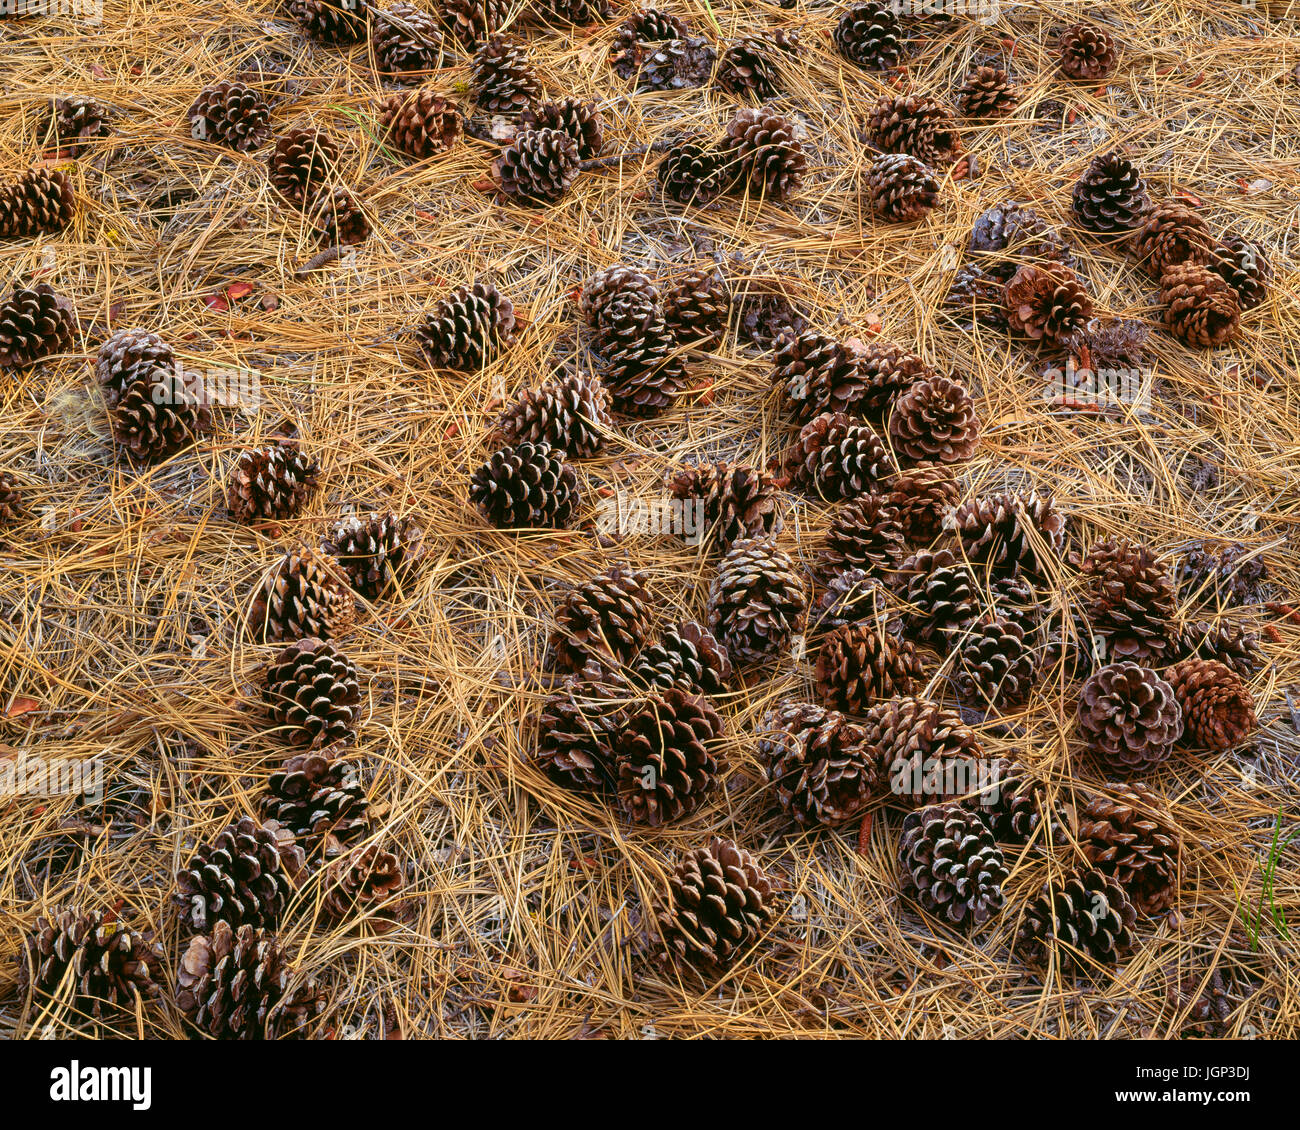 USA, Oregon, Newberry National Volcanic Monument, Cones, and needles of ponderosa pine cover the forest floor. Stock Photo